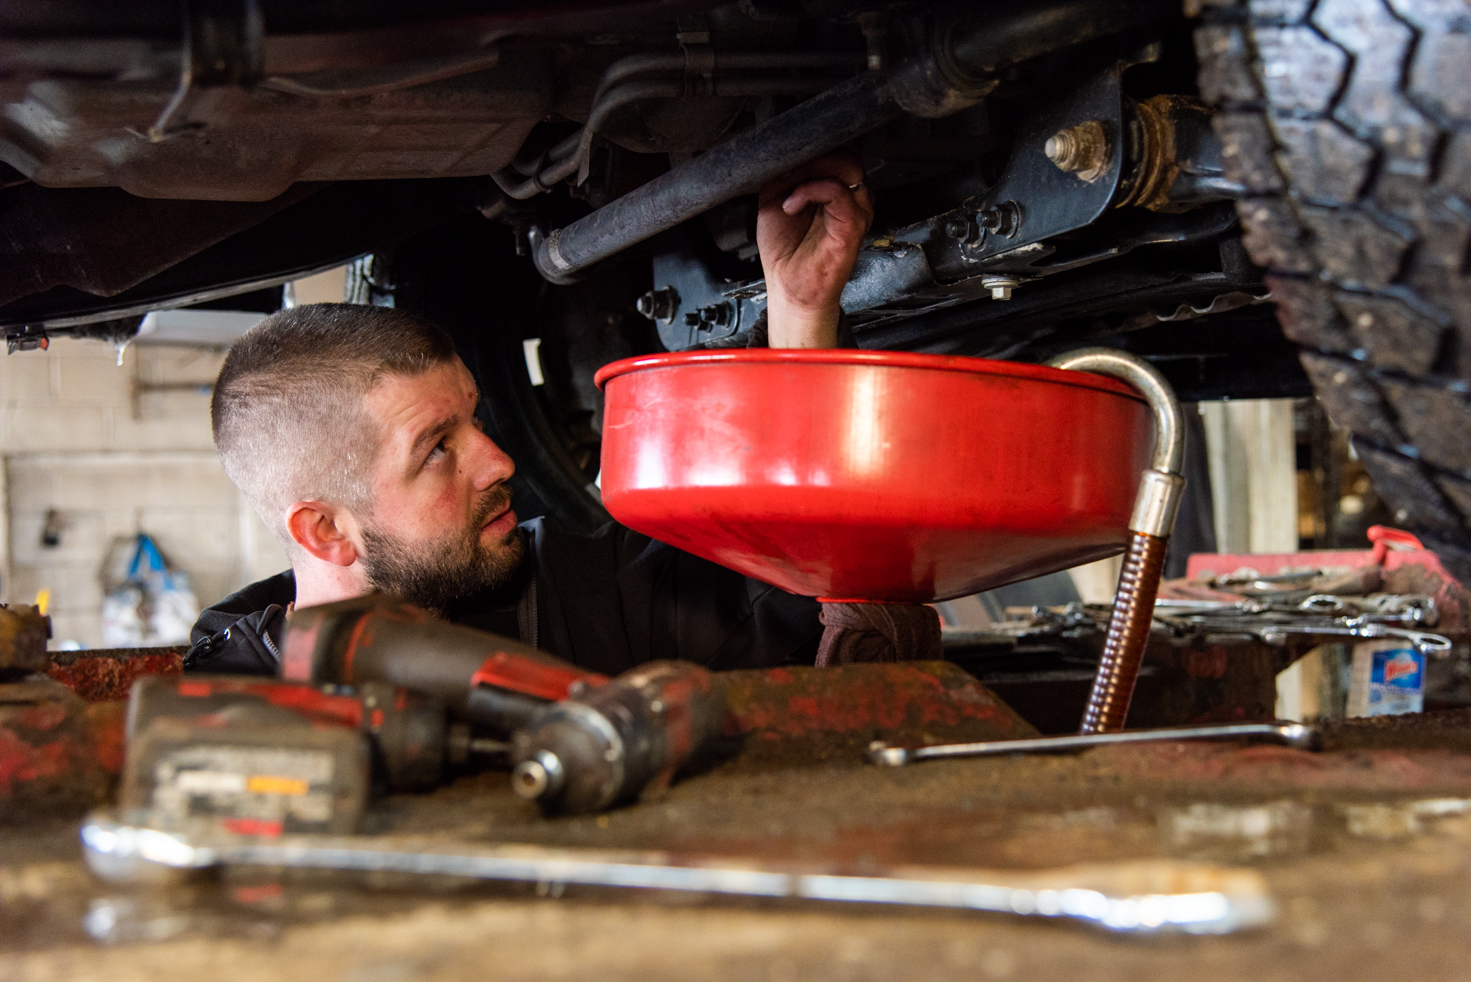 Get the most out of your vehicle! Preventative Maintenance Is a Must!